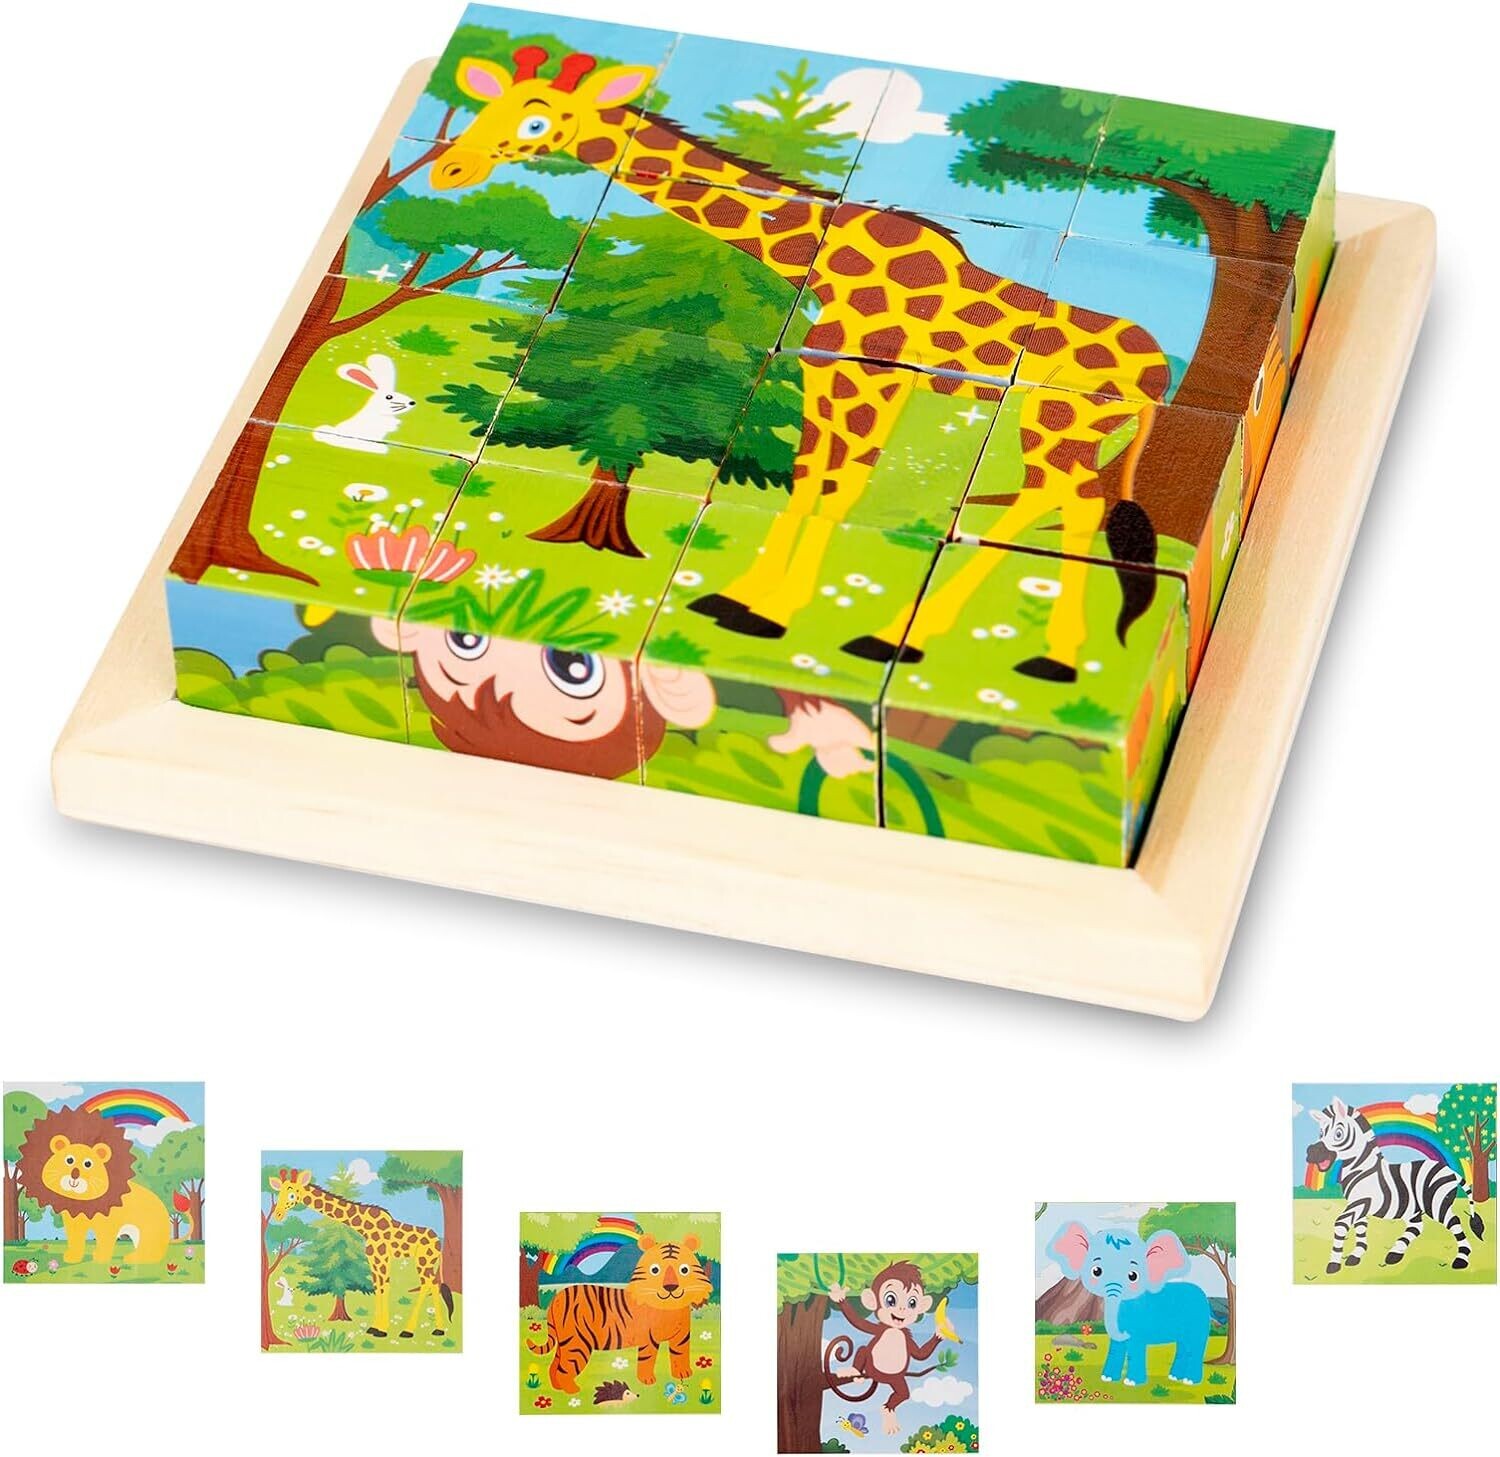 Wooden Picture Cube, Wooden Puzzle, 3D Cube Puzzle, Puzzle Games, 6-in-1 Animal Motifs for Children from 1 2 3 Years